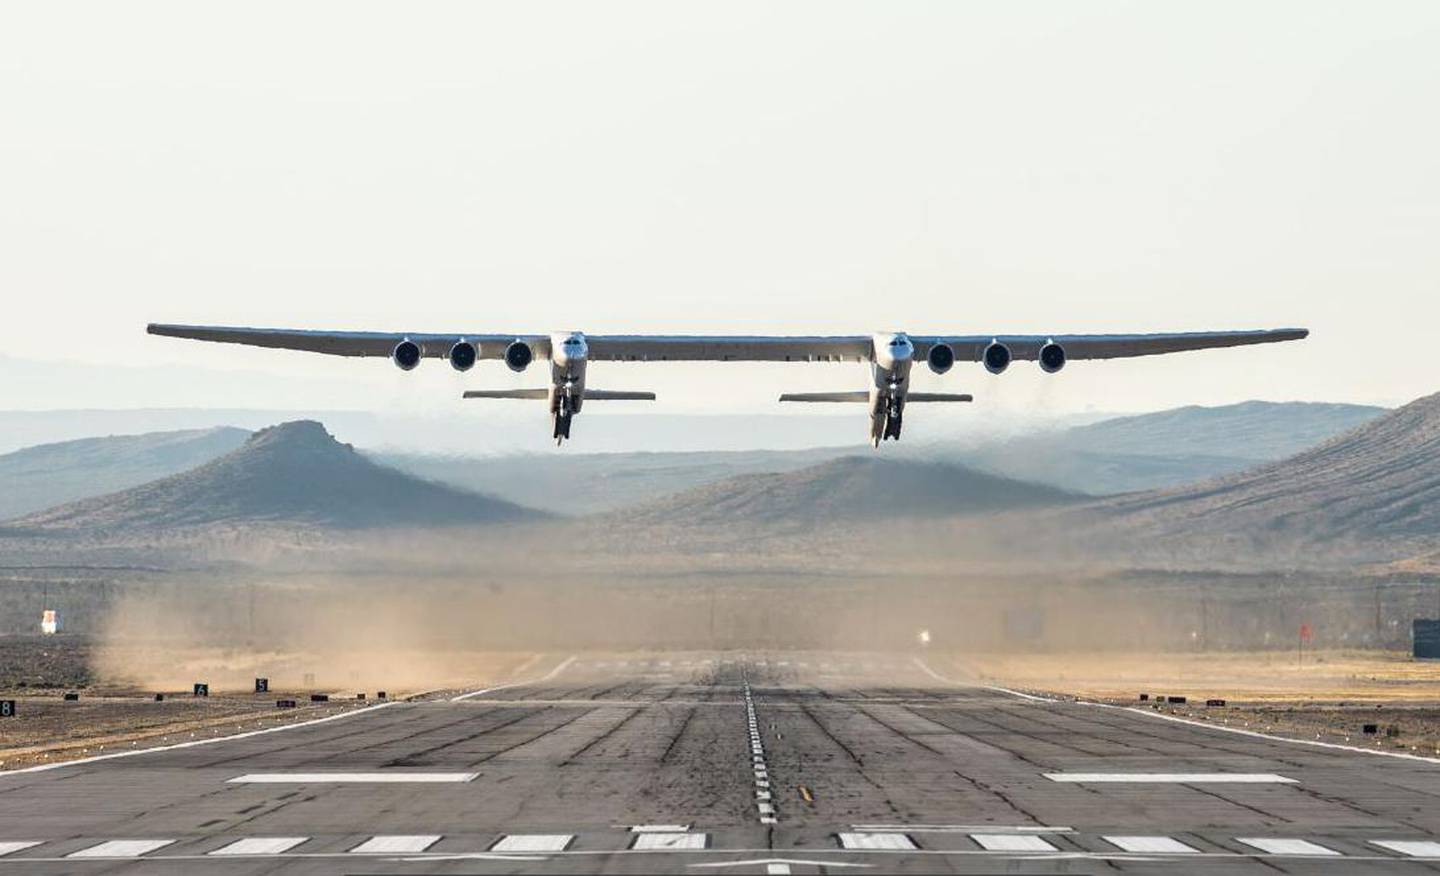 This handout photograph obtained courtesy of Stratolaunch shows the Stratolaunch plane flying above the California desert, April 13, 2019, the first test flight of the US company's gigantic aircraft whose wingspan is almost half that of an Airbus A380. - The strange aircraft, built by the legendary aeronautical engineering company Scaled Composites in the Mojave Desert, has two fuselages and is powered by six Boeing 747 engines.  It must theoretically be used to carry and drop at altitude a small rocket that will then light its engine, and will propel to space to place satellites in orbit. This is a more flexible method of accessing the space than vertical rocket takeoffs, as a large take-off runway would suffice. (Photo by Handout / Stratolaunch Systems Corp / AFP) / == RESTRICTED TO EDITORIAL USE  / MANDATORY CREDIT:  "AFP PHOTO /  STRATOLAUNCH" /  NO MARKETING / NO ADVERTISING CAMPAIGNS /  DISTRIBUTED AS A SERVICE TO CLIENTS  ==